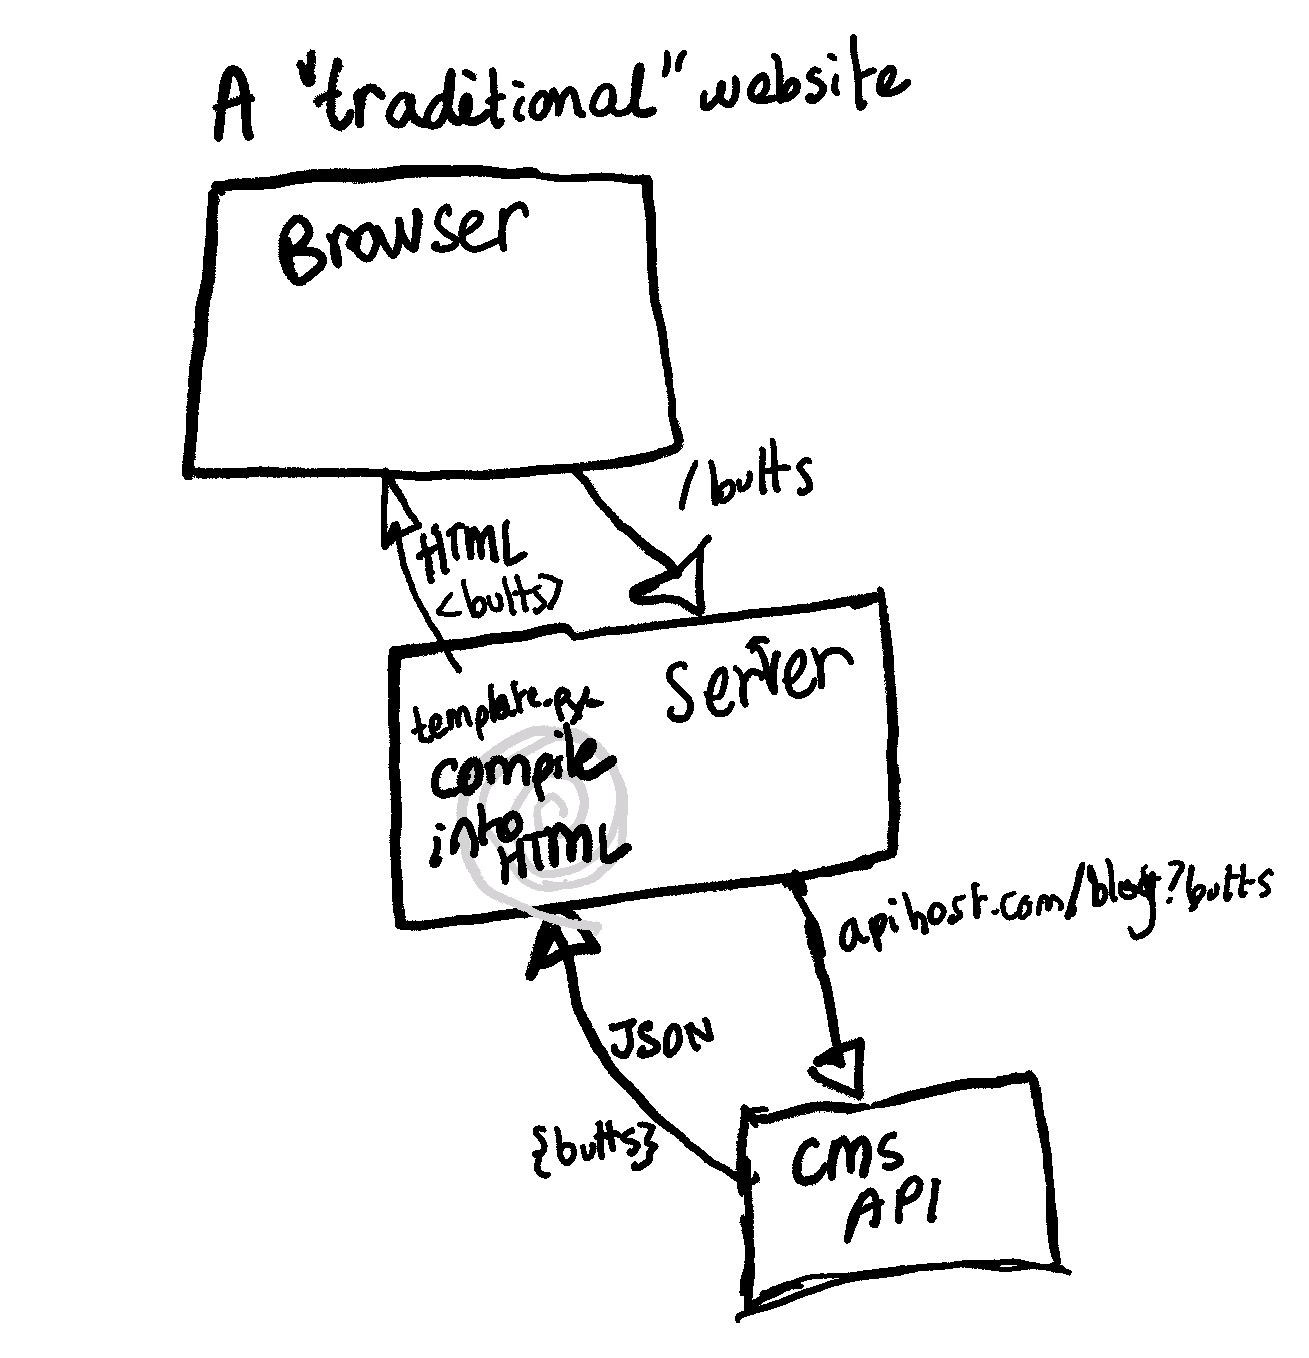 A hand-sketched diagram. It shows a browser making a request to the url /butts to the server. The server then makes an API call. The API responds with JSON. The server compiles the data into HTML and sends it back to the browser.